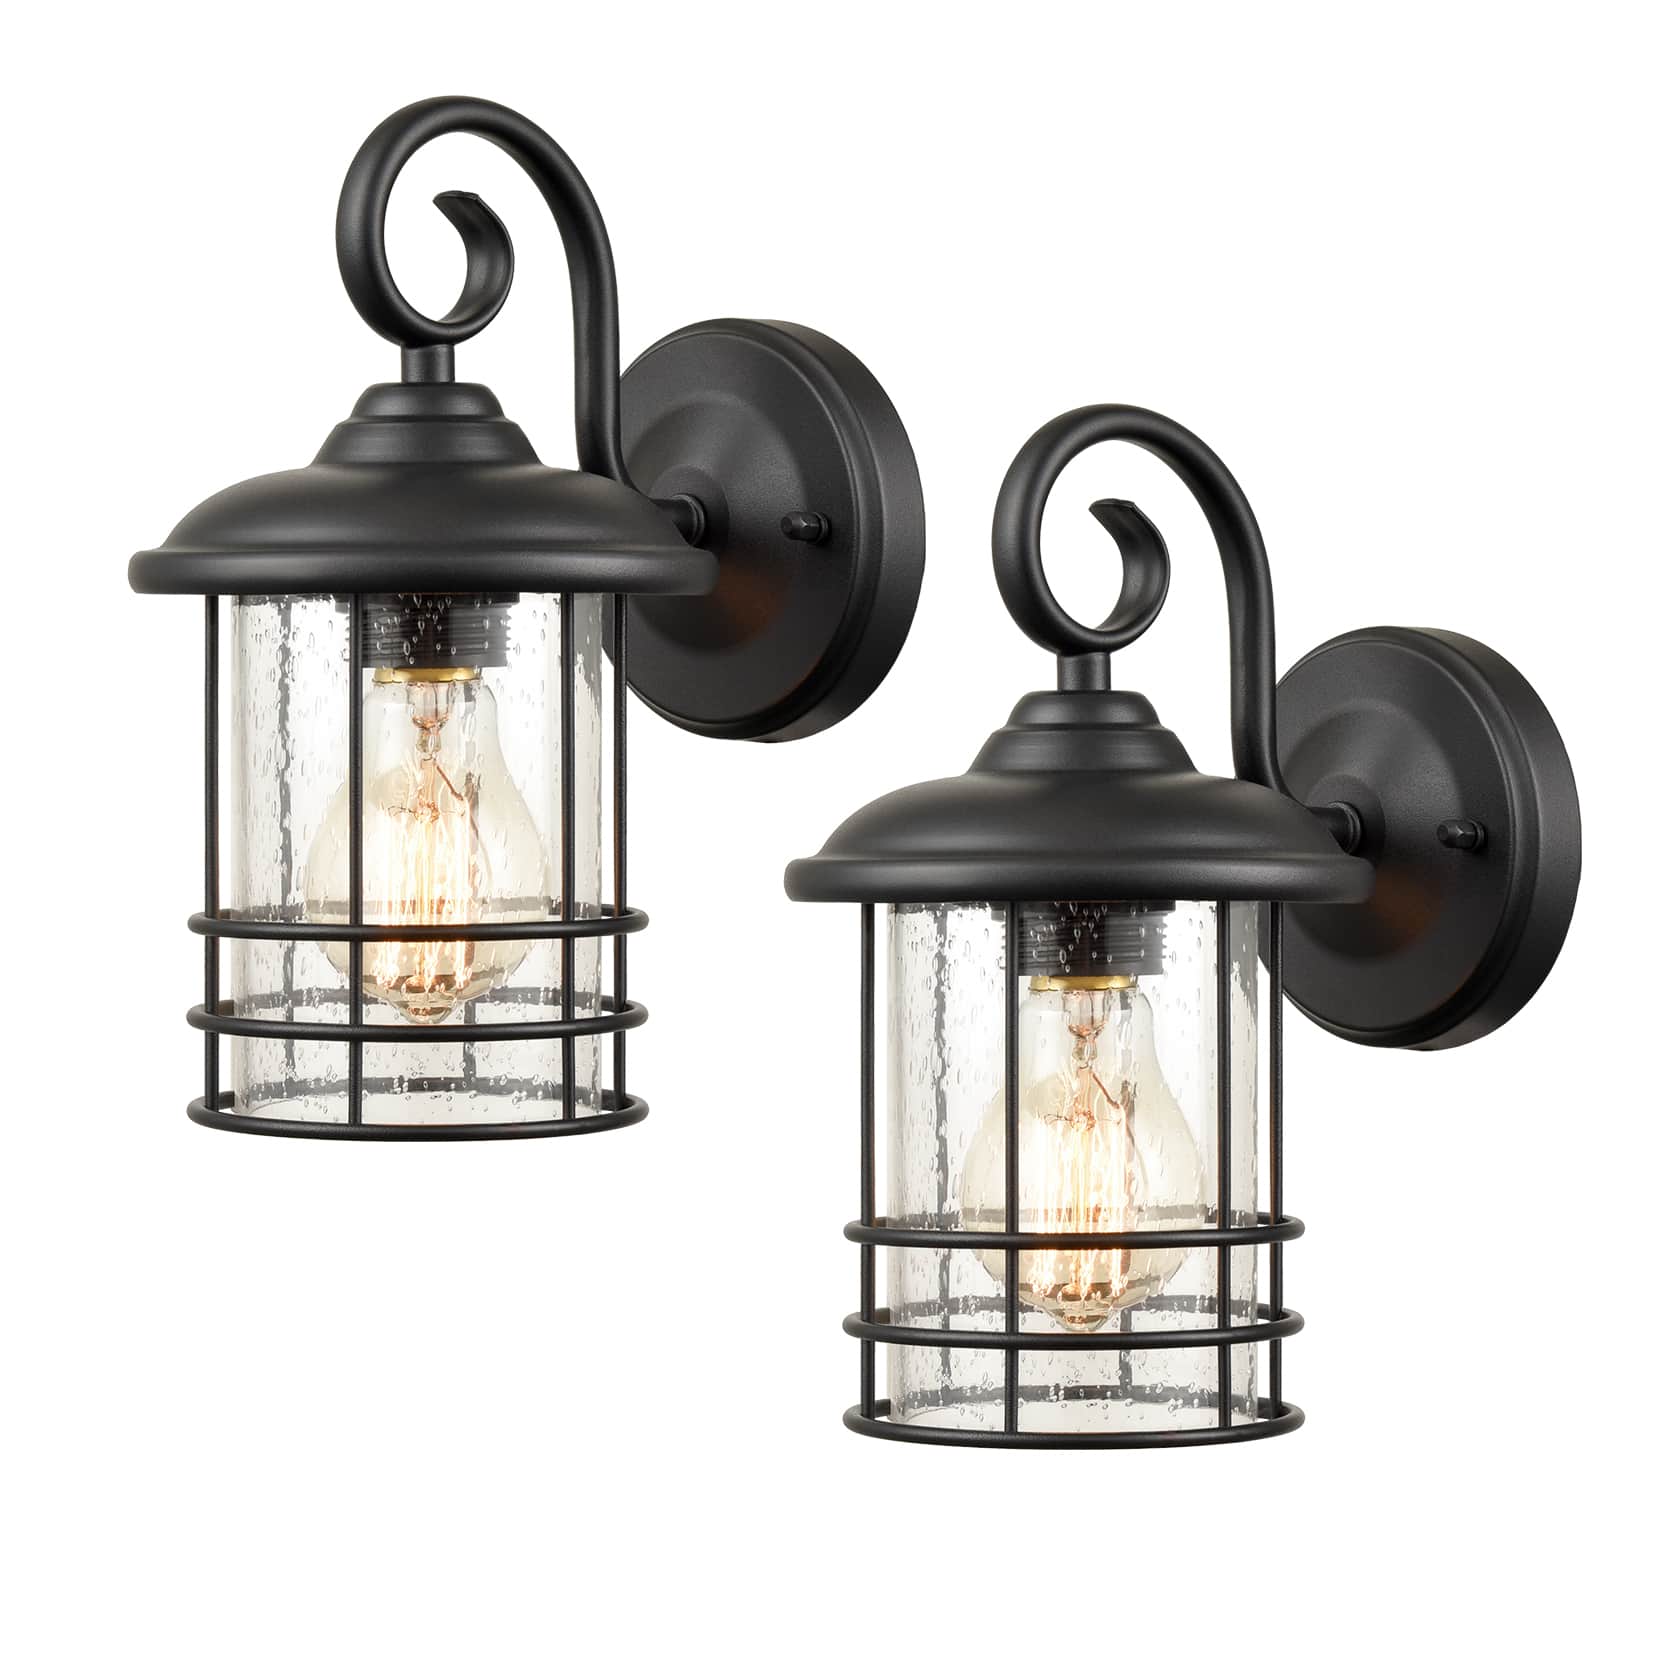 Retro Industrial Candle Style Wall Sconce Light Seedy Glass Lamp Shade Fixture